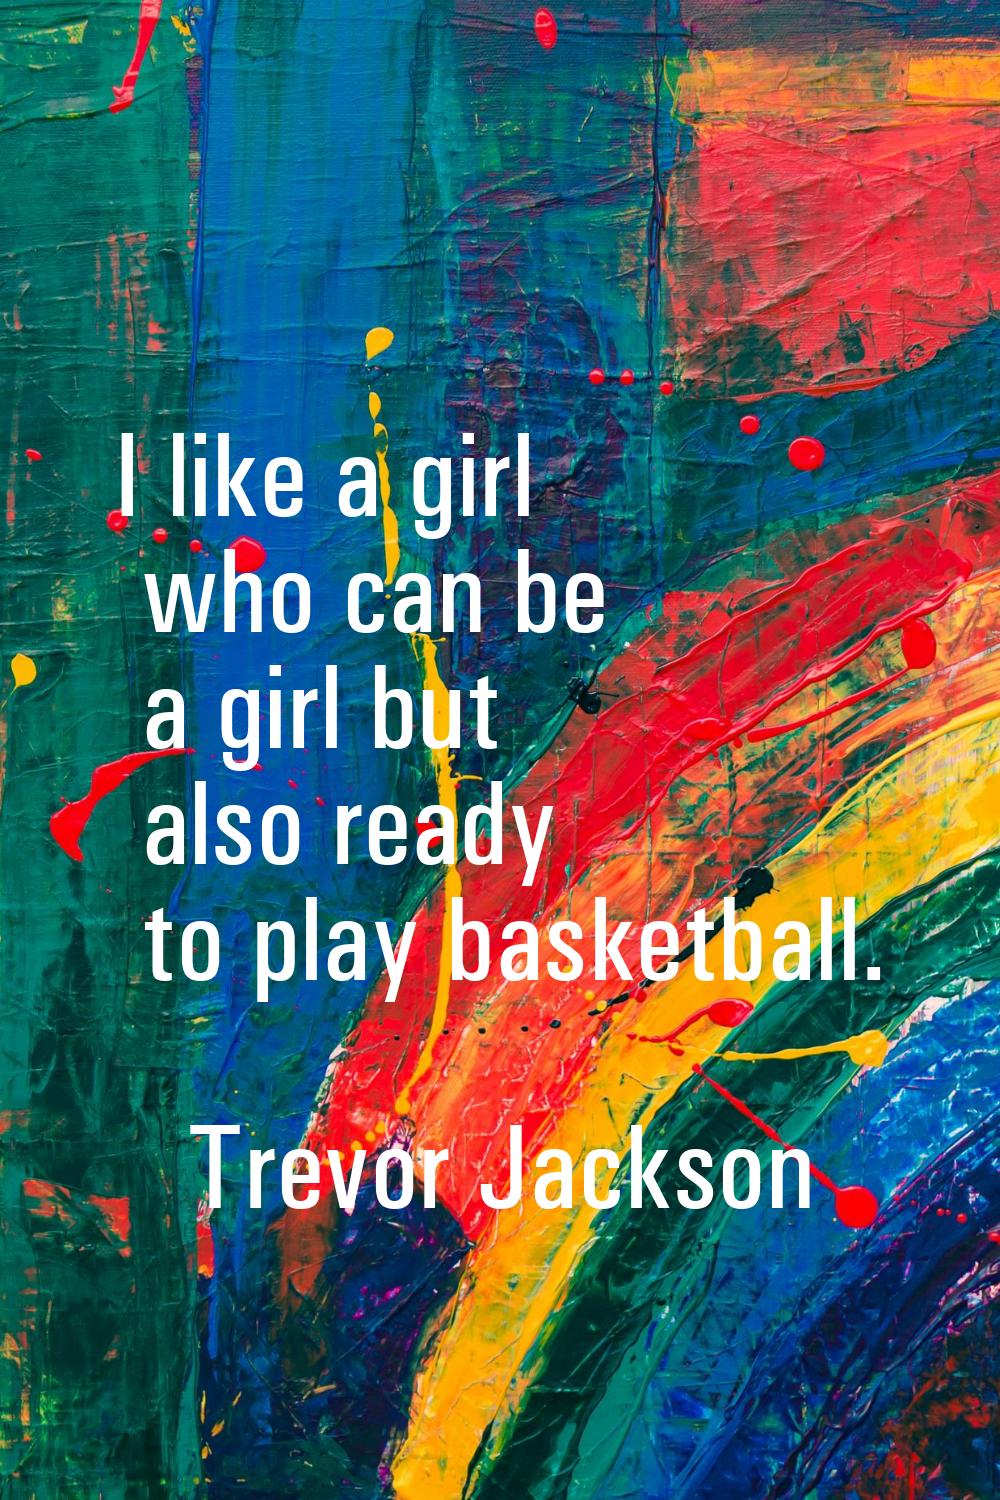 I like a girl who can be a girl but also ready to play basketball.